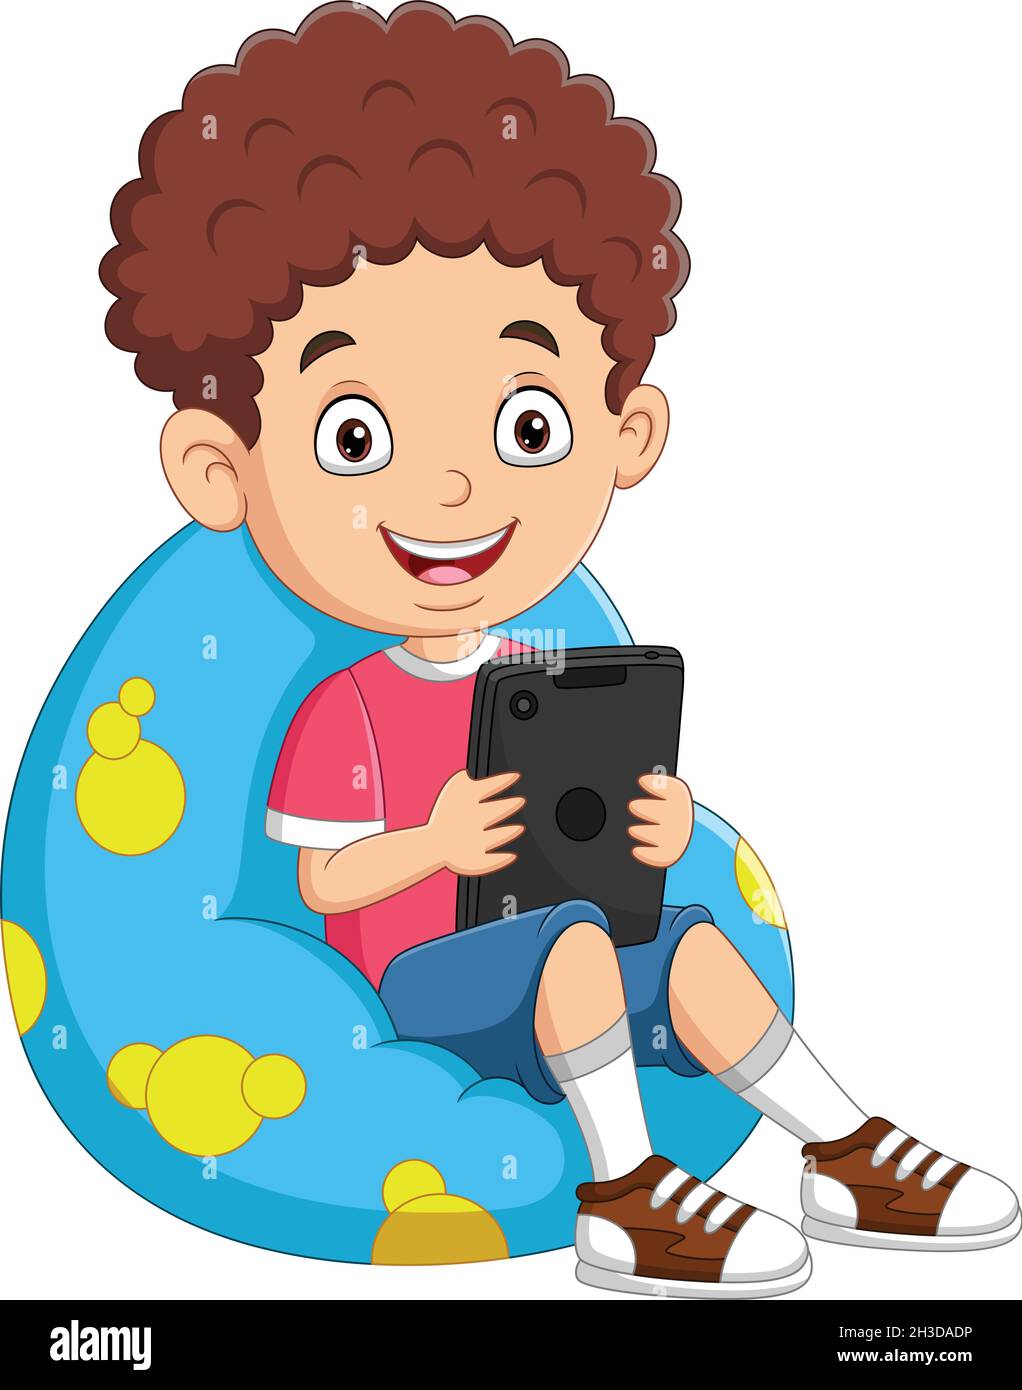 Little boy playing tablet on big pillow Stock Vector